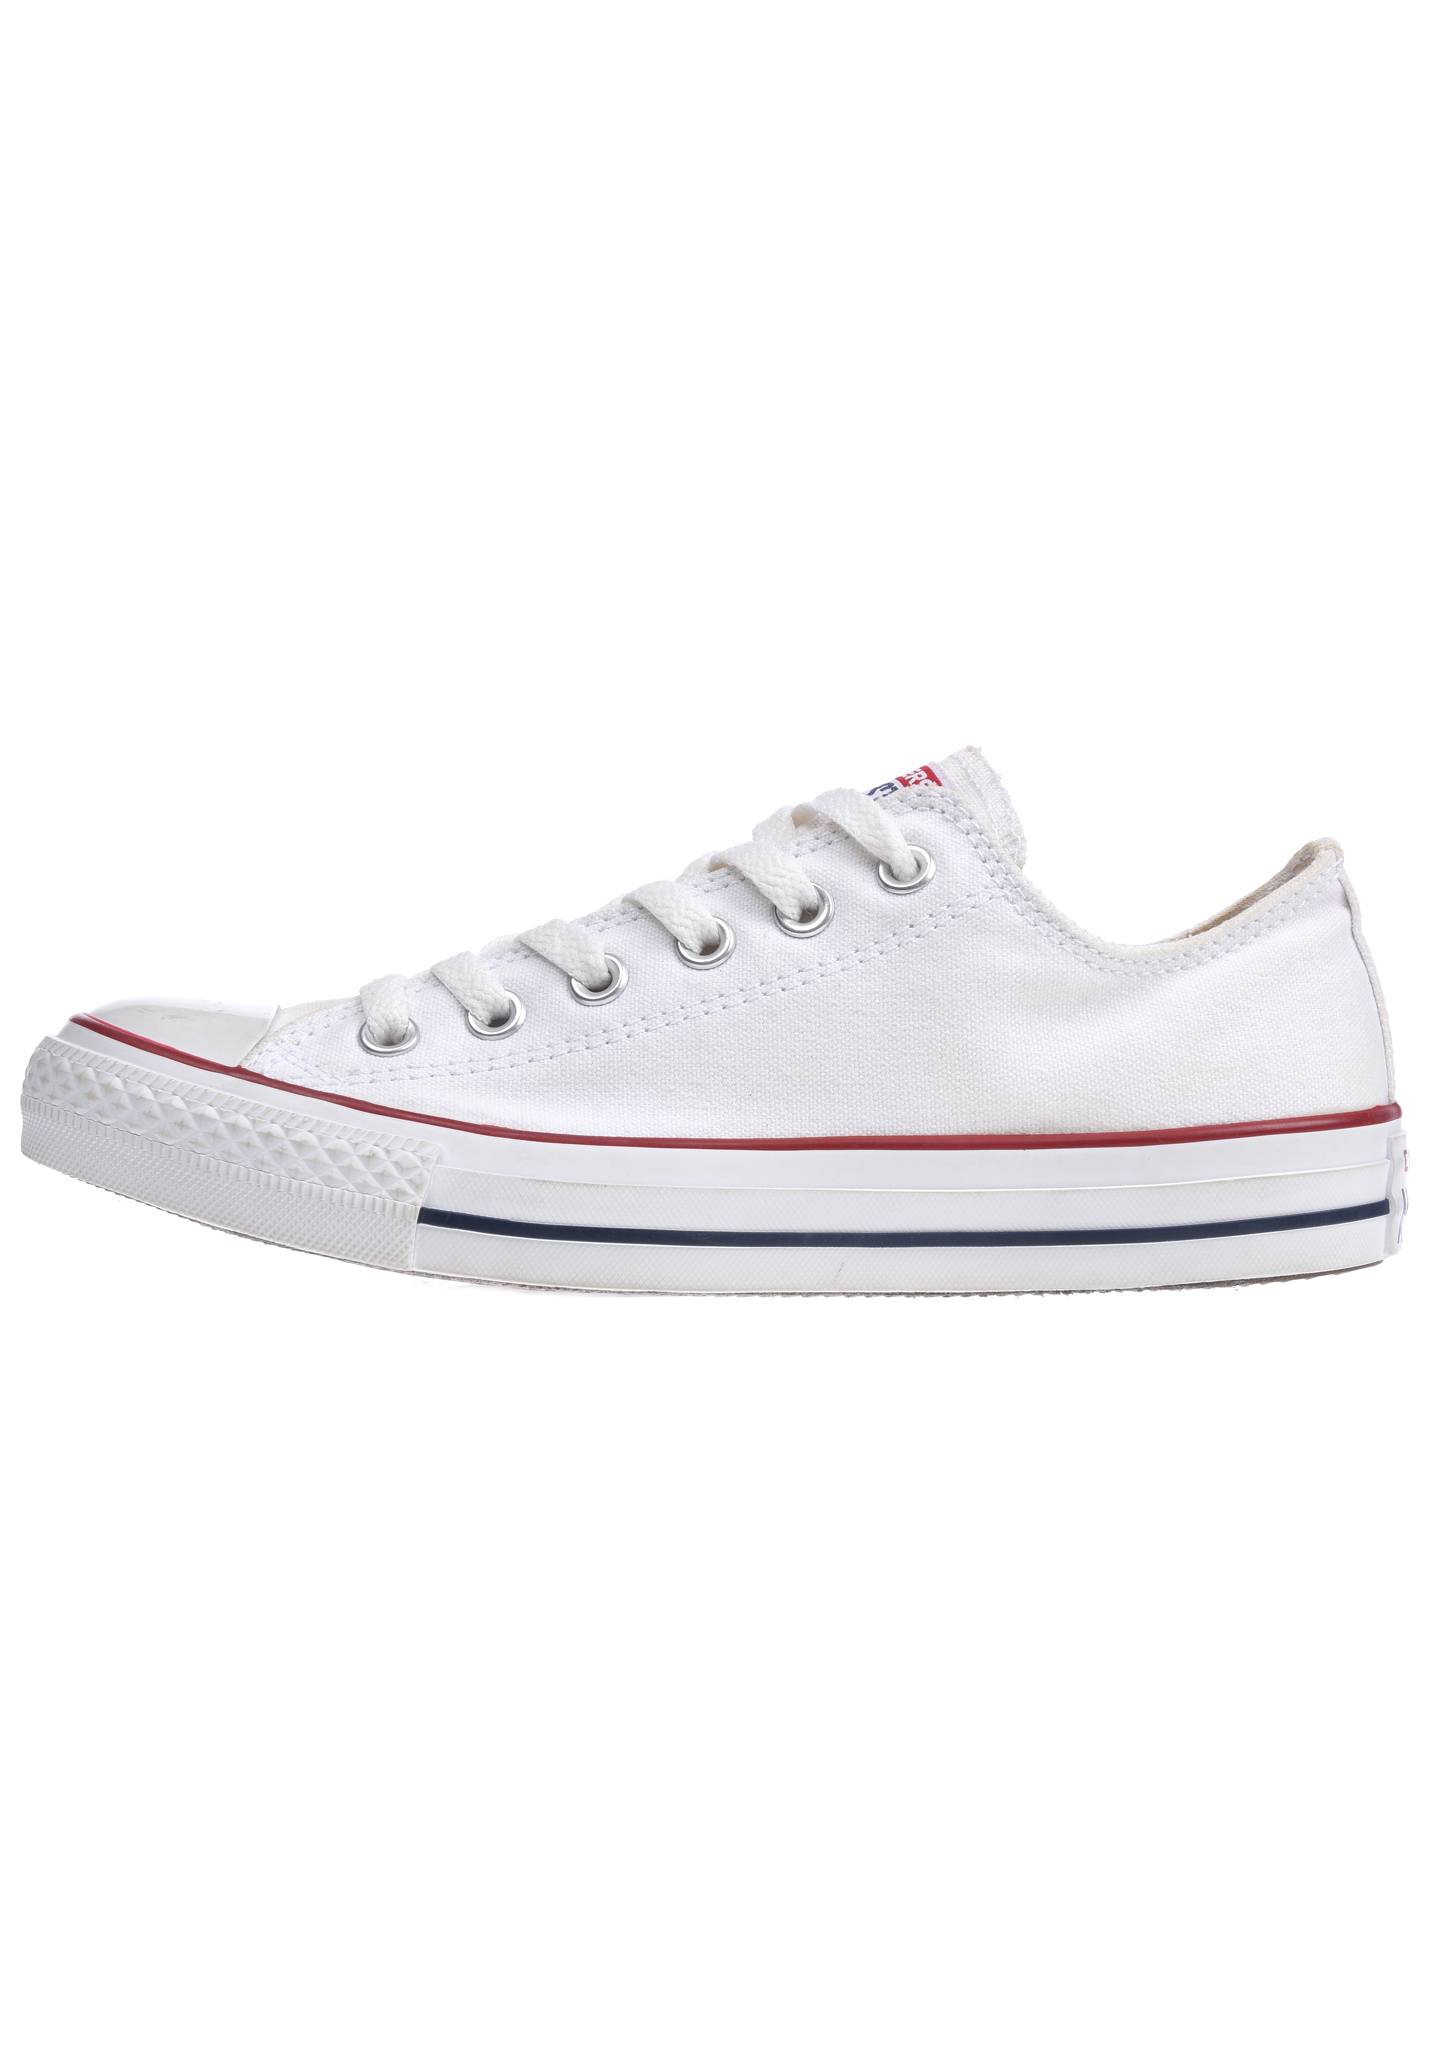 Converse Chuck Taylor All Star Ox Sneaker Low white 53